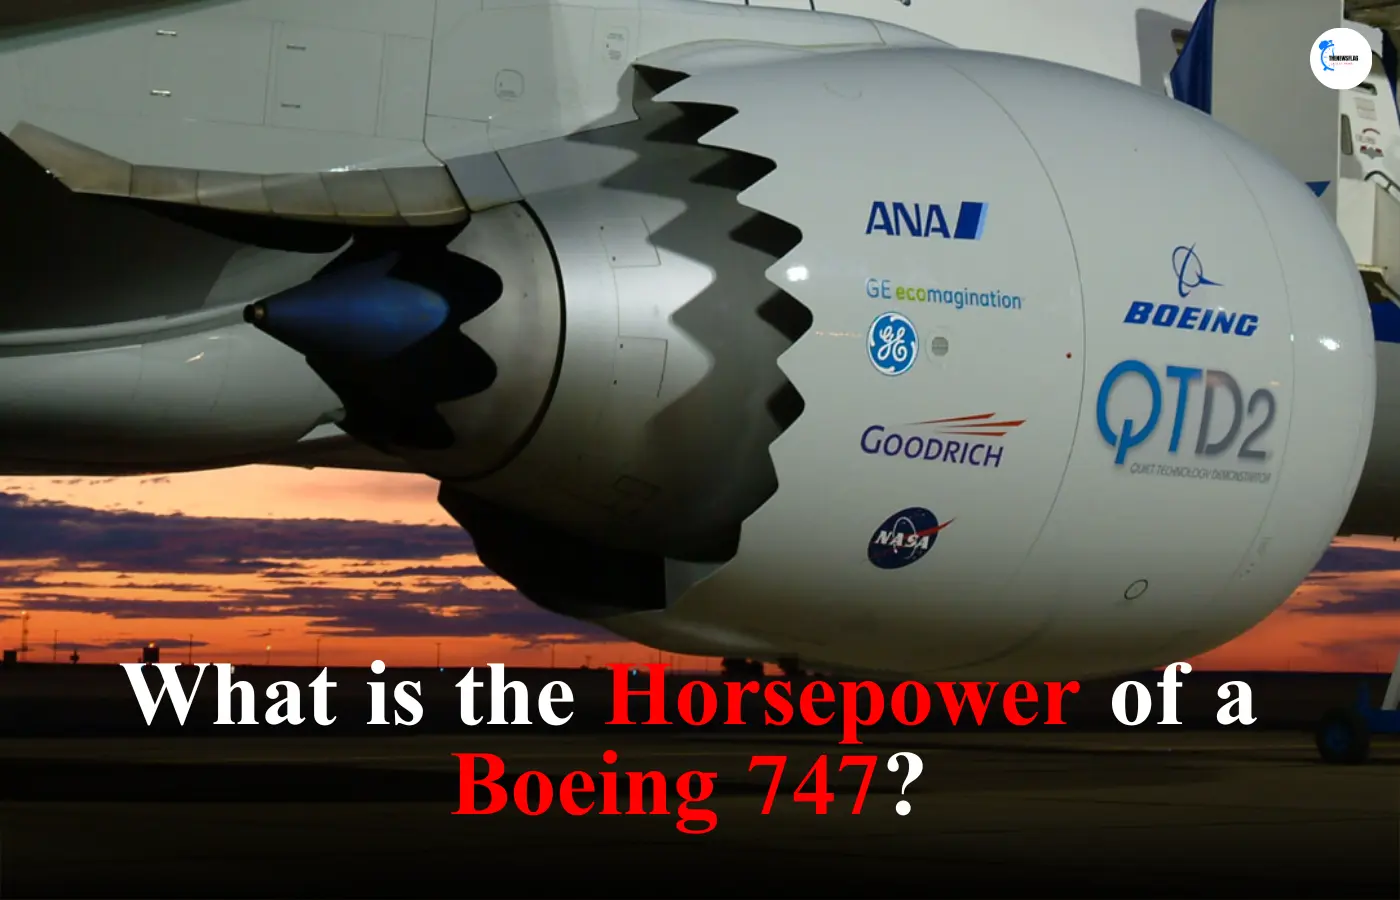 What is the horsepower of a Boeing 747?